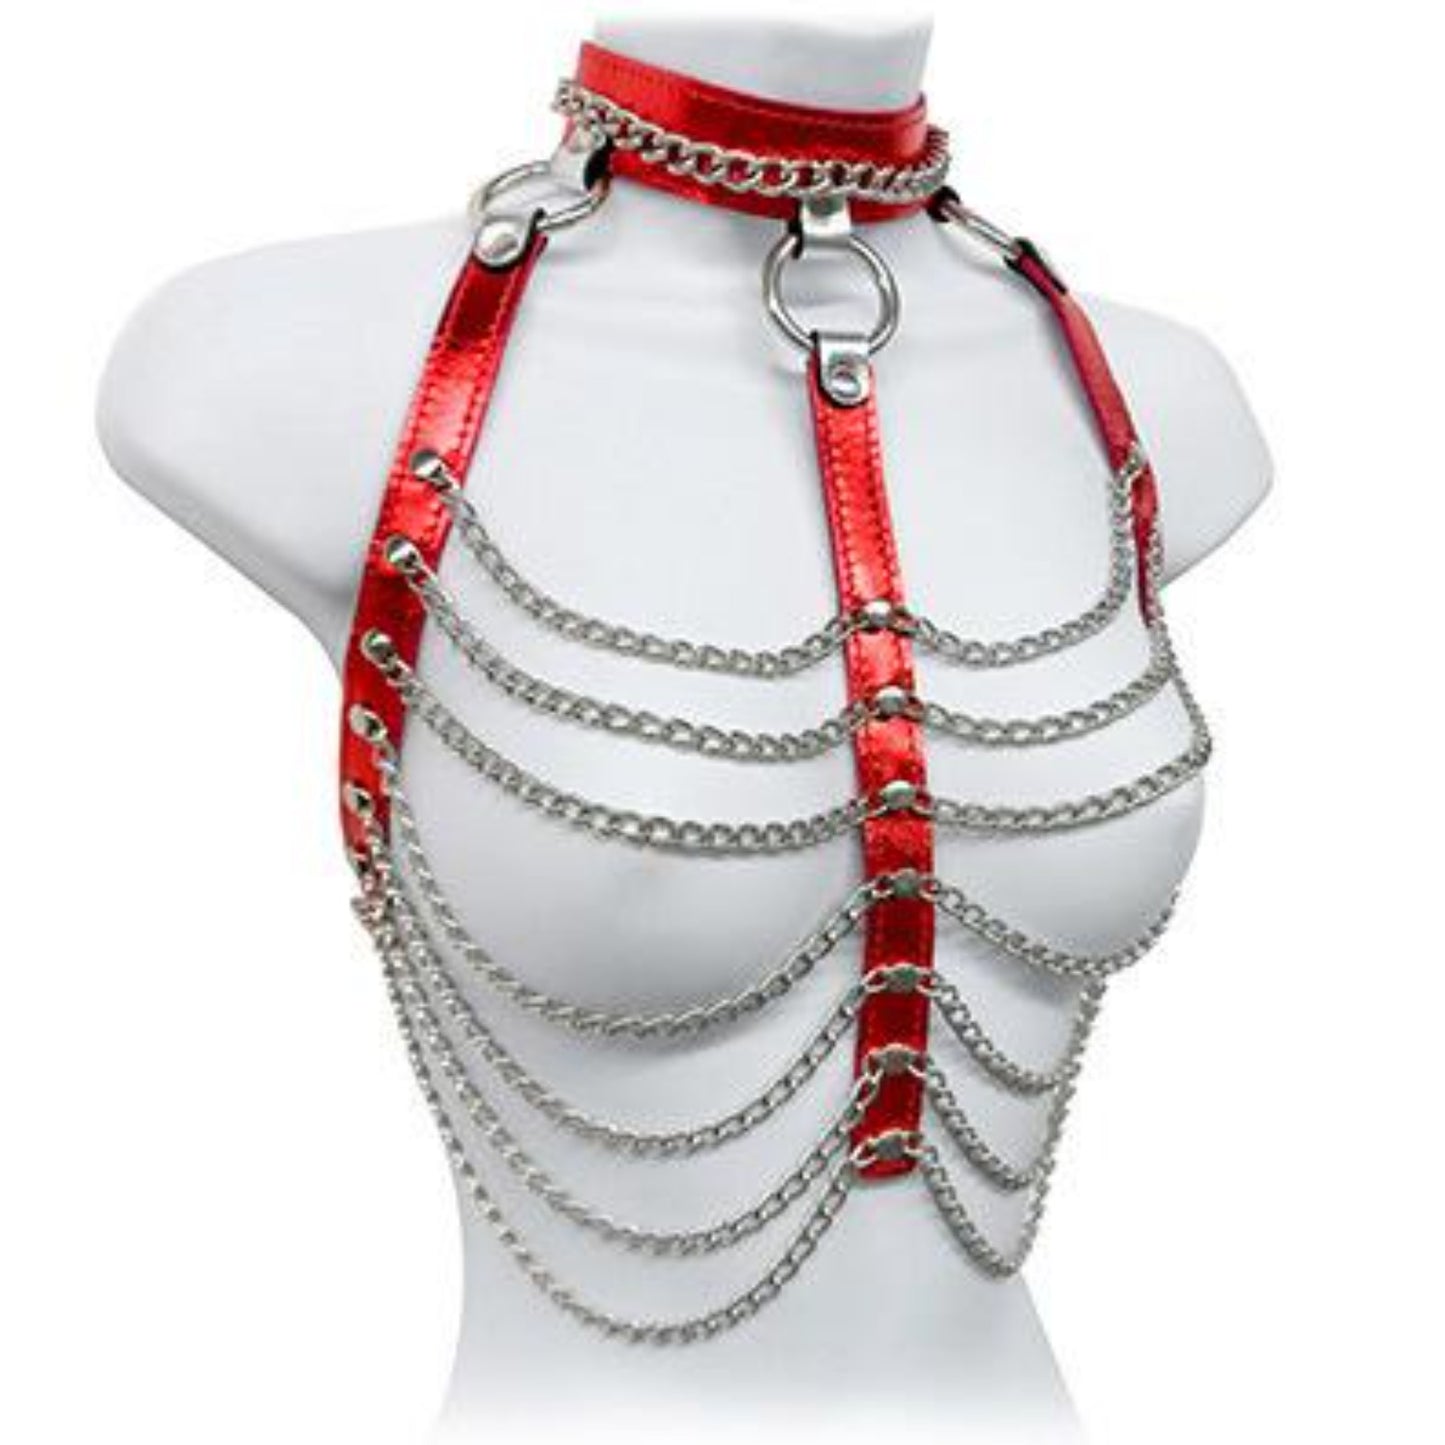 The red metallic leather and chain three column halter harness on a mannequin.